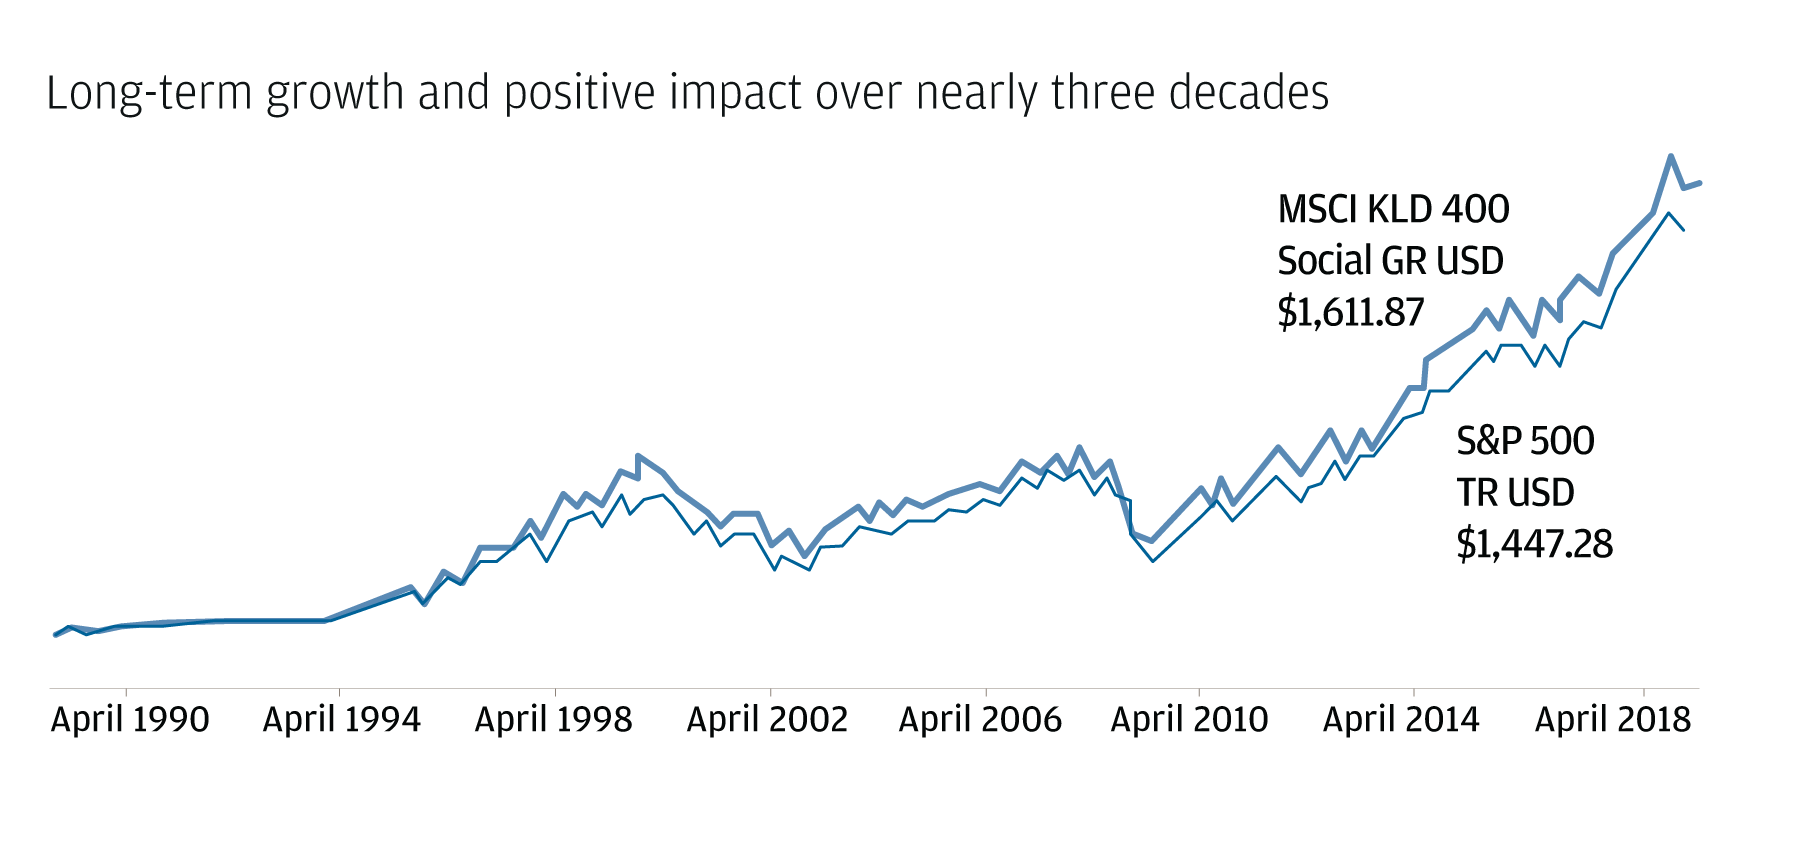 Long-term growth and positive impact over nearly three decades